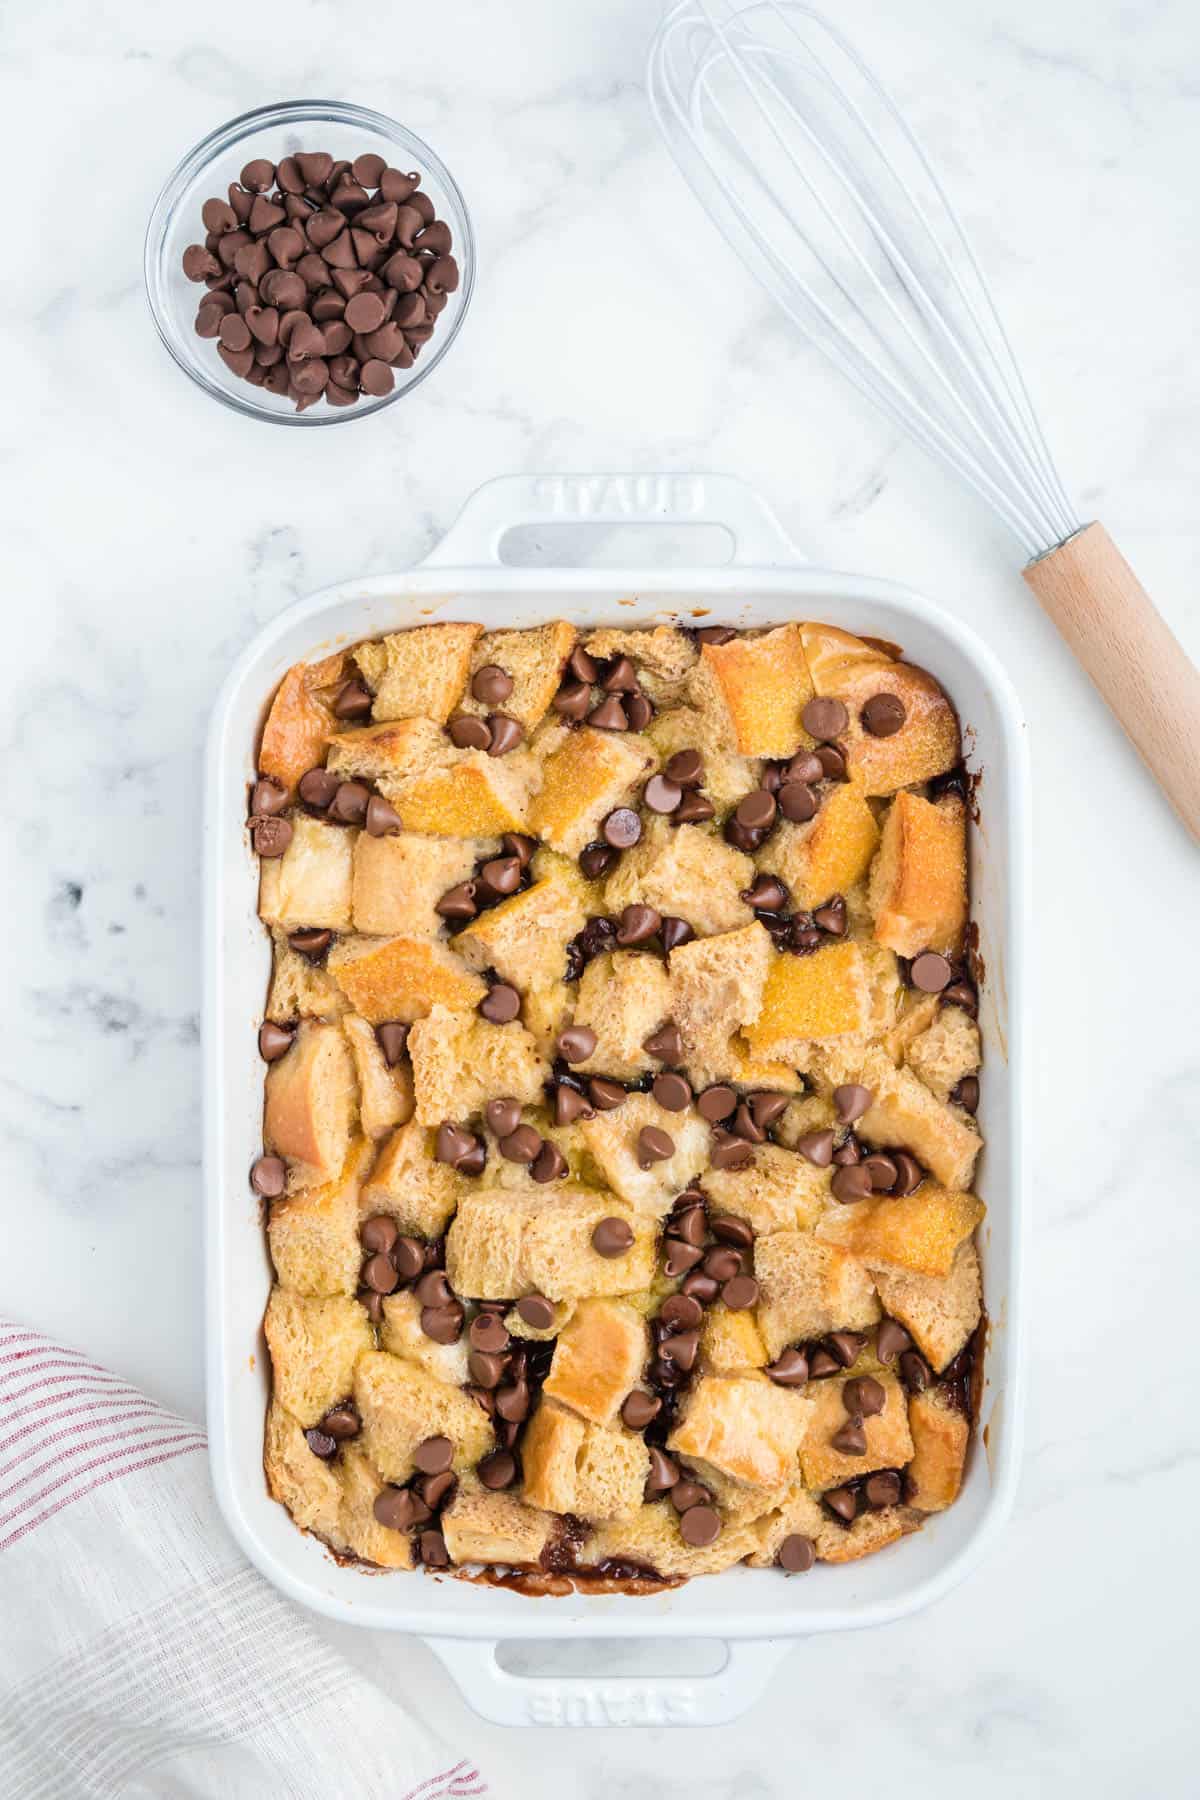 Choc chip bread pudding in a white baking dish.